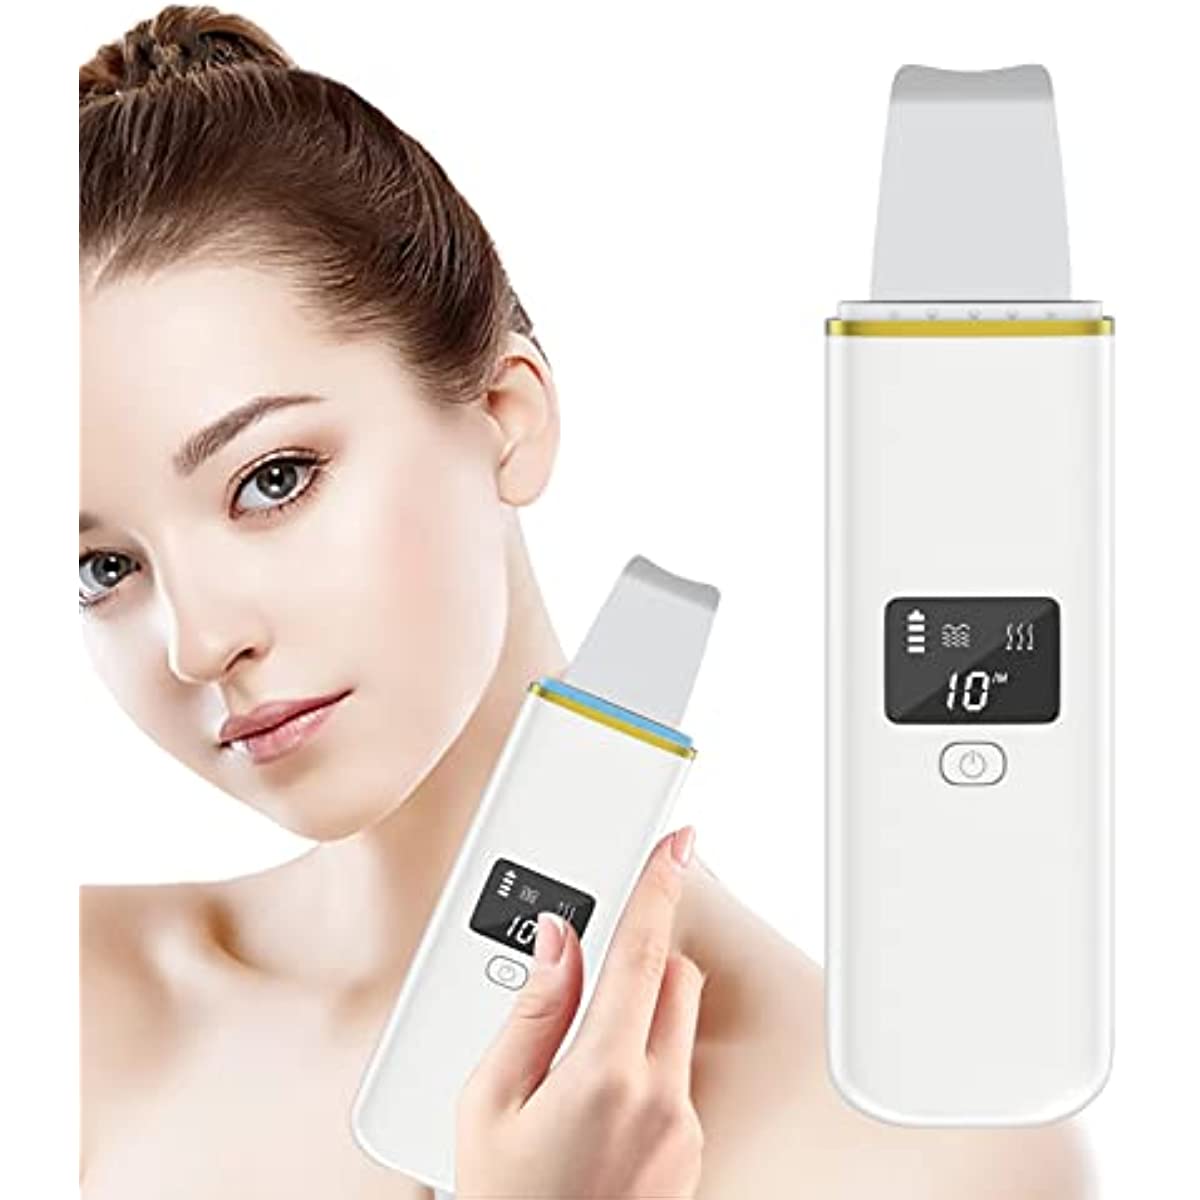 Ultrasonic Skin Scrubber, Electric Face Spatula with 4 Modes, Facial Blackhead Removal Pores Cleaner